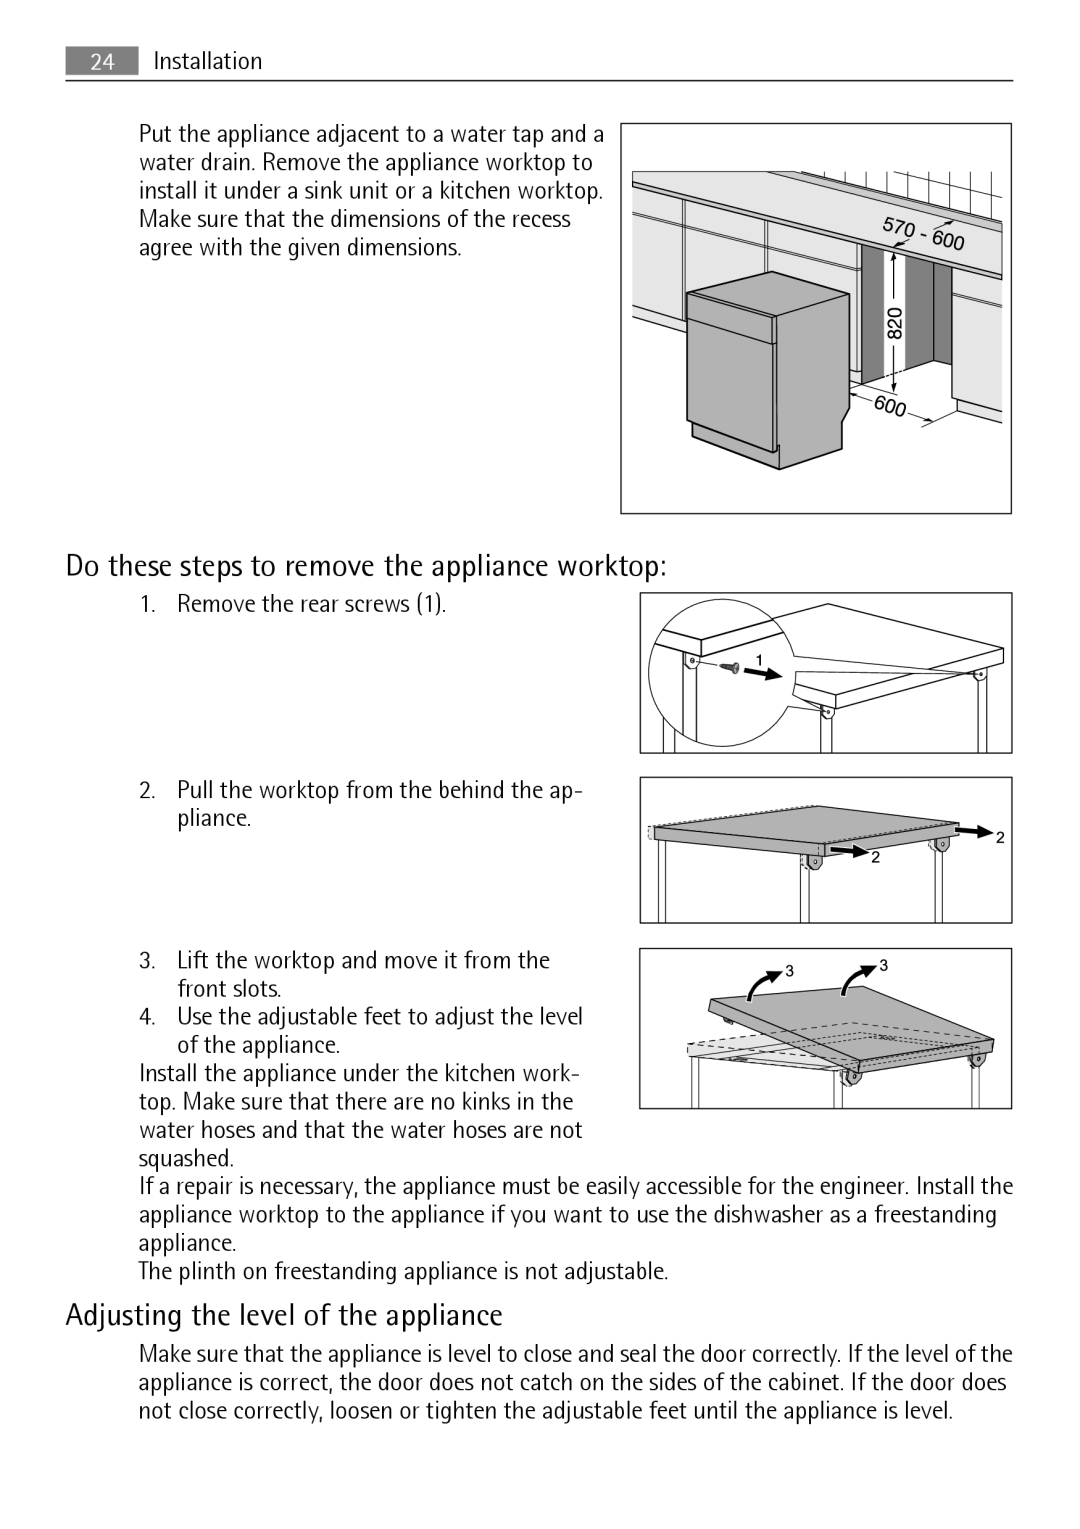 AEG 45003 user manual Do these steps to remove the appliance worktop, Adjusting the level of the appliance 